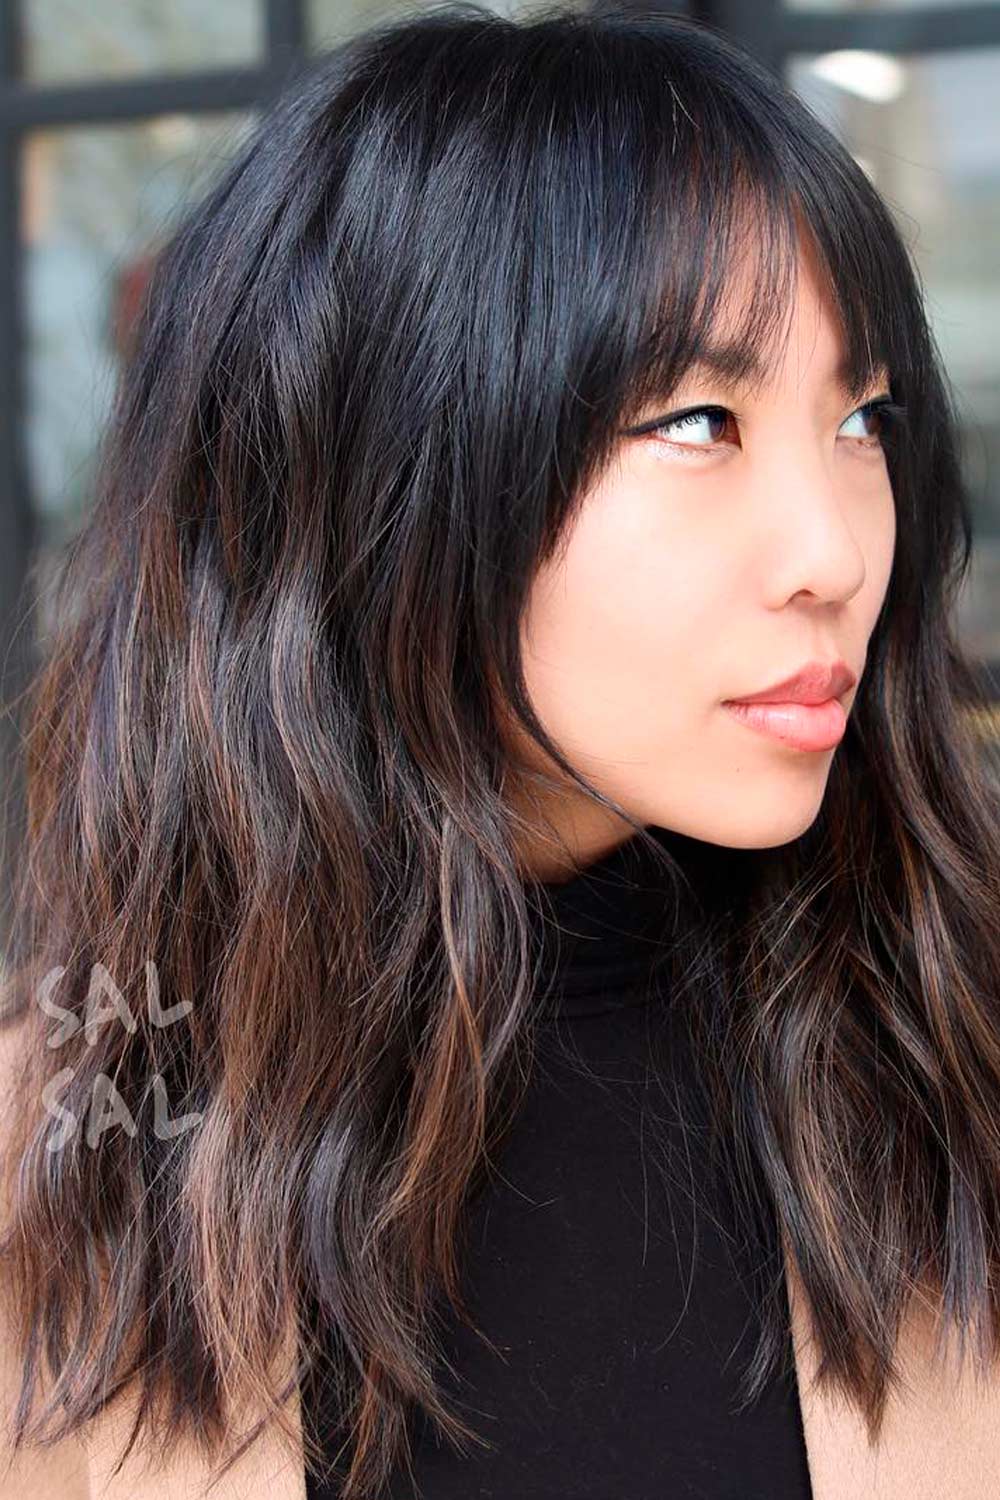 Korean Bangs Hairstyles You Could Totally Pull Off - Love Hairstyles